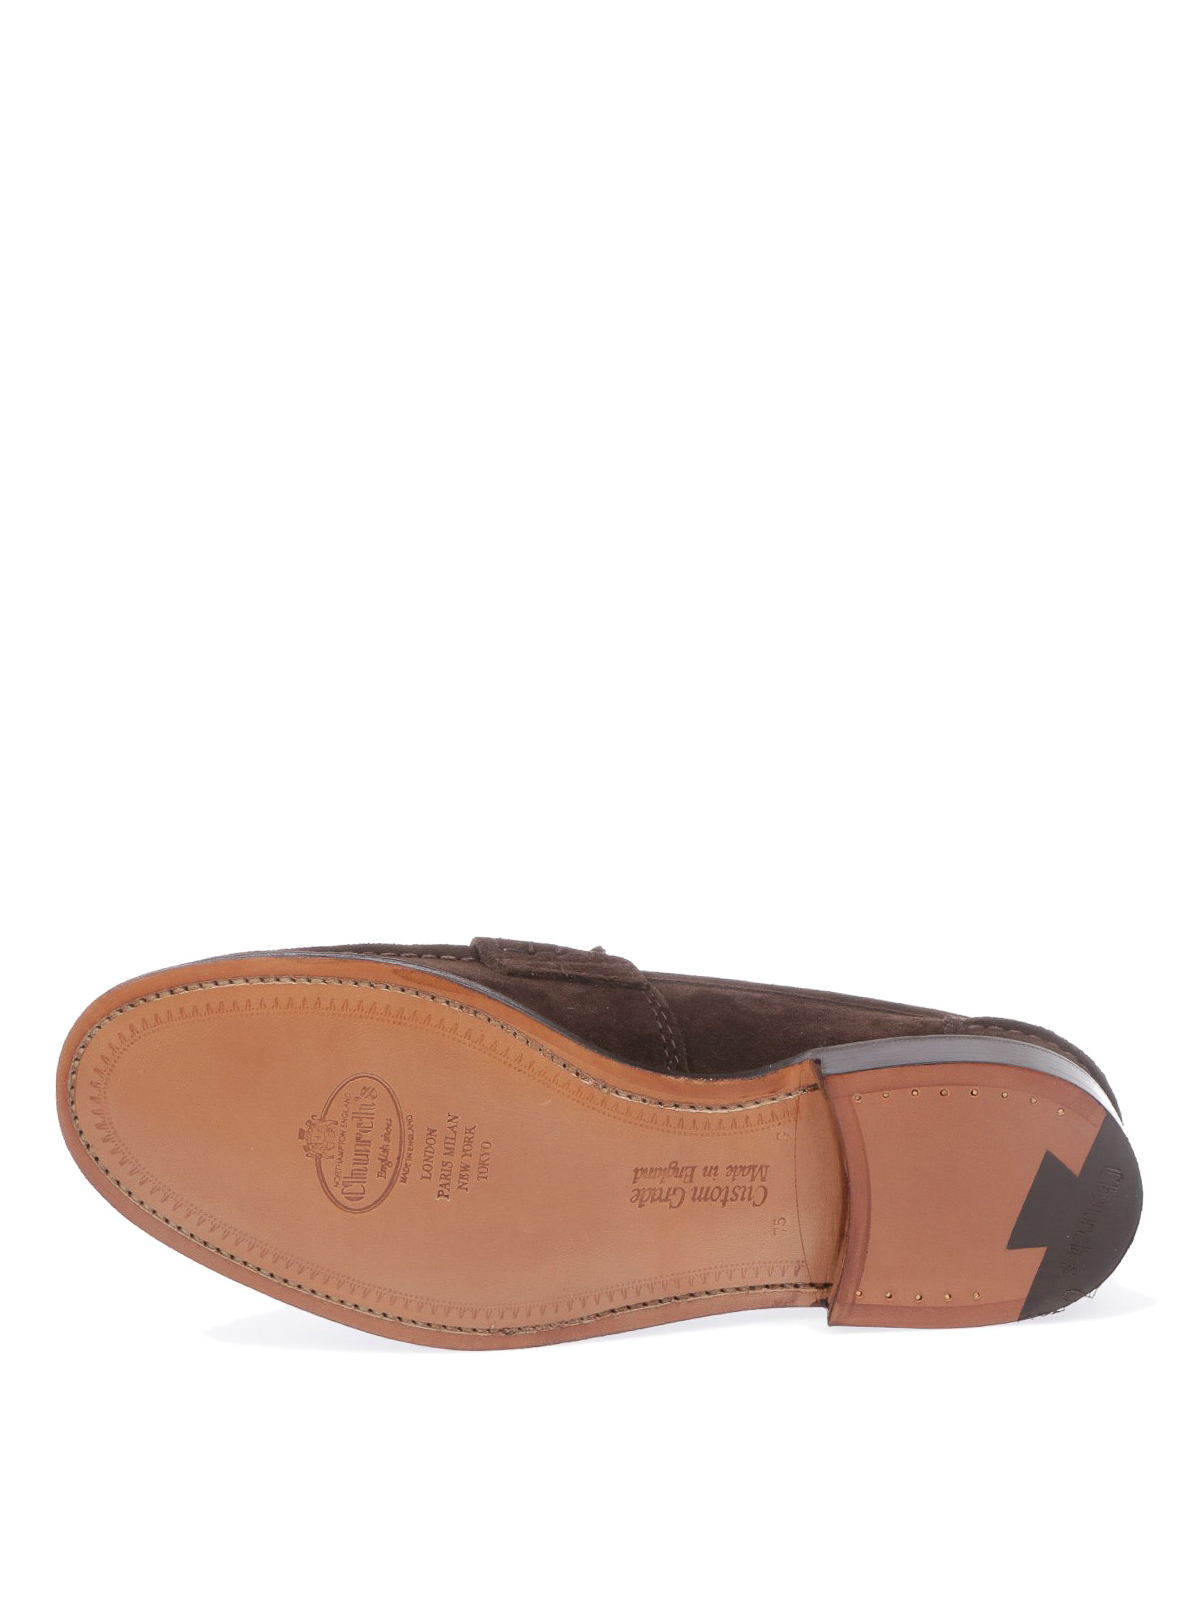 Loafers & Slippers Church's - Pembrey brown suede loafers ...